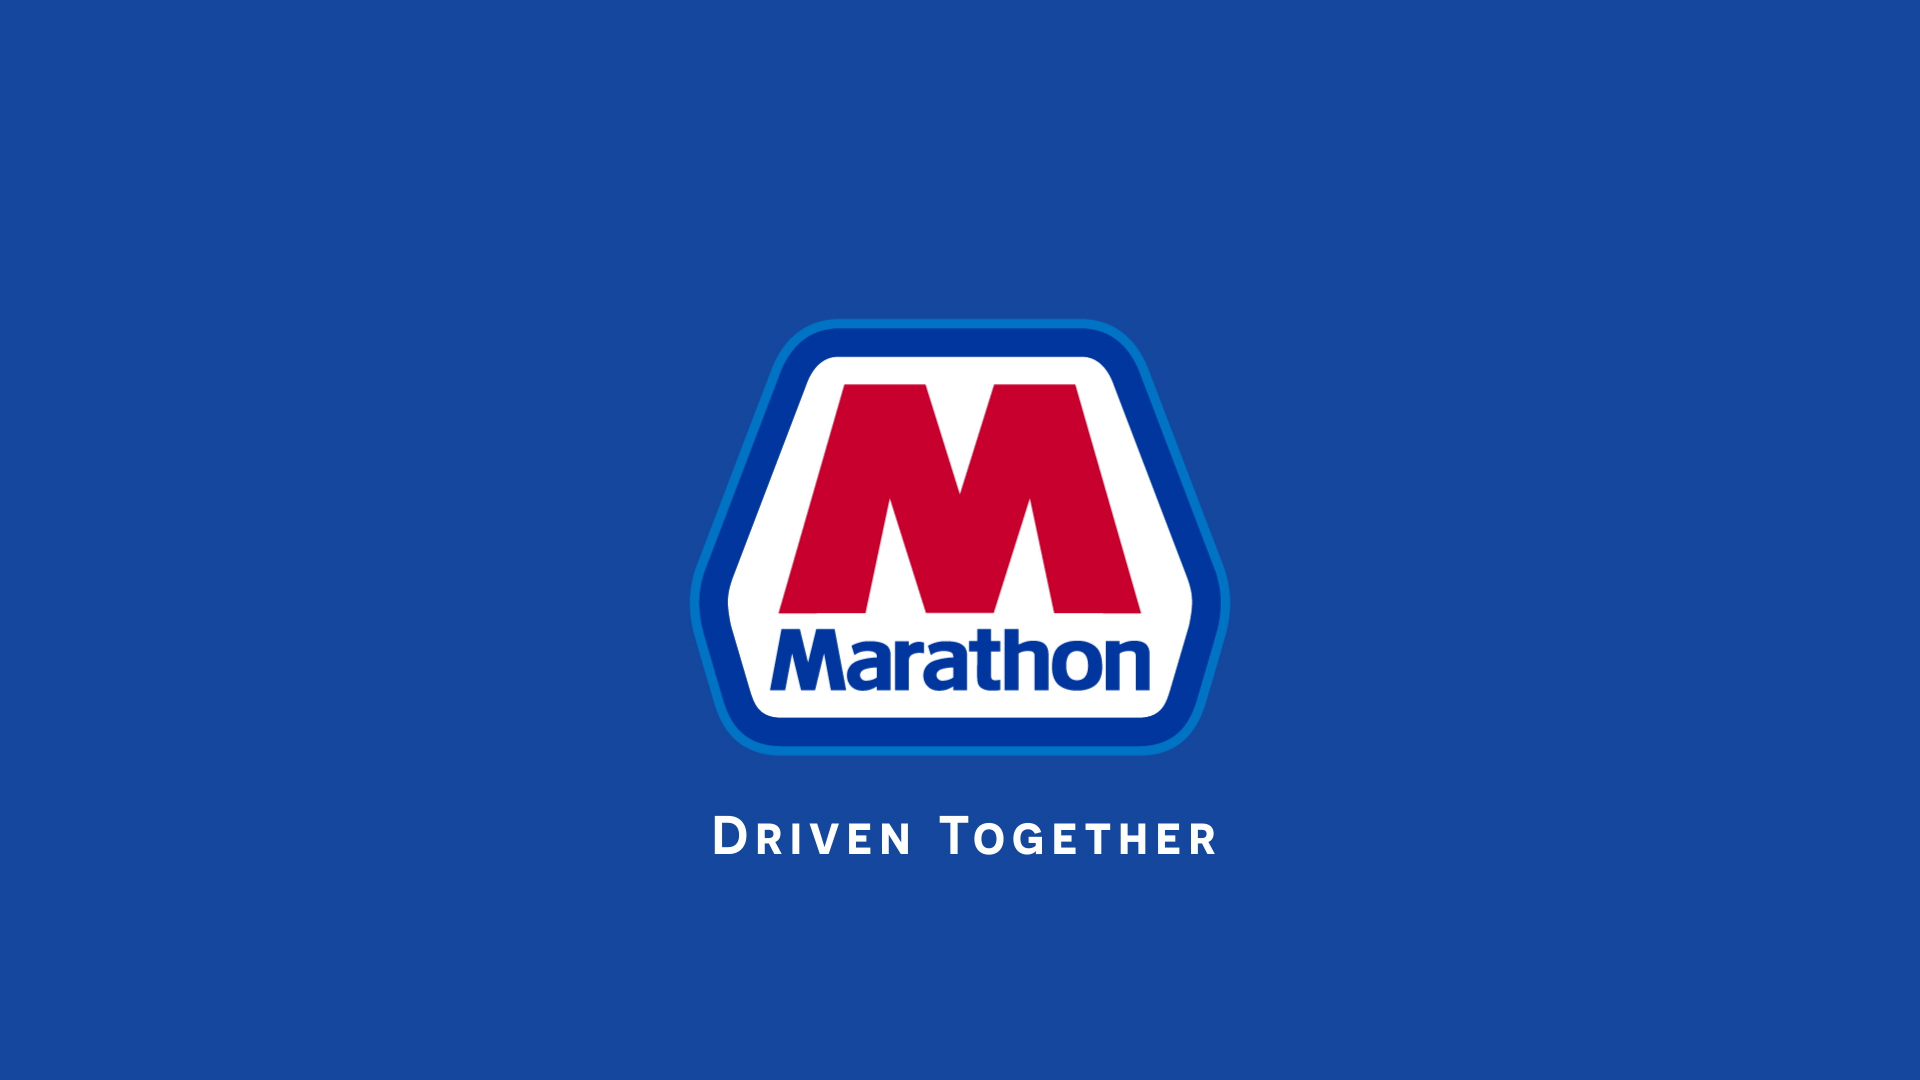 Driven Together: Marathon brand launches new ad campaign and website